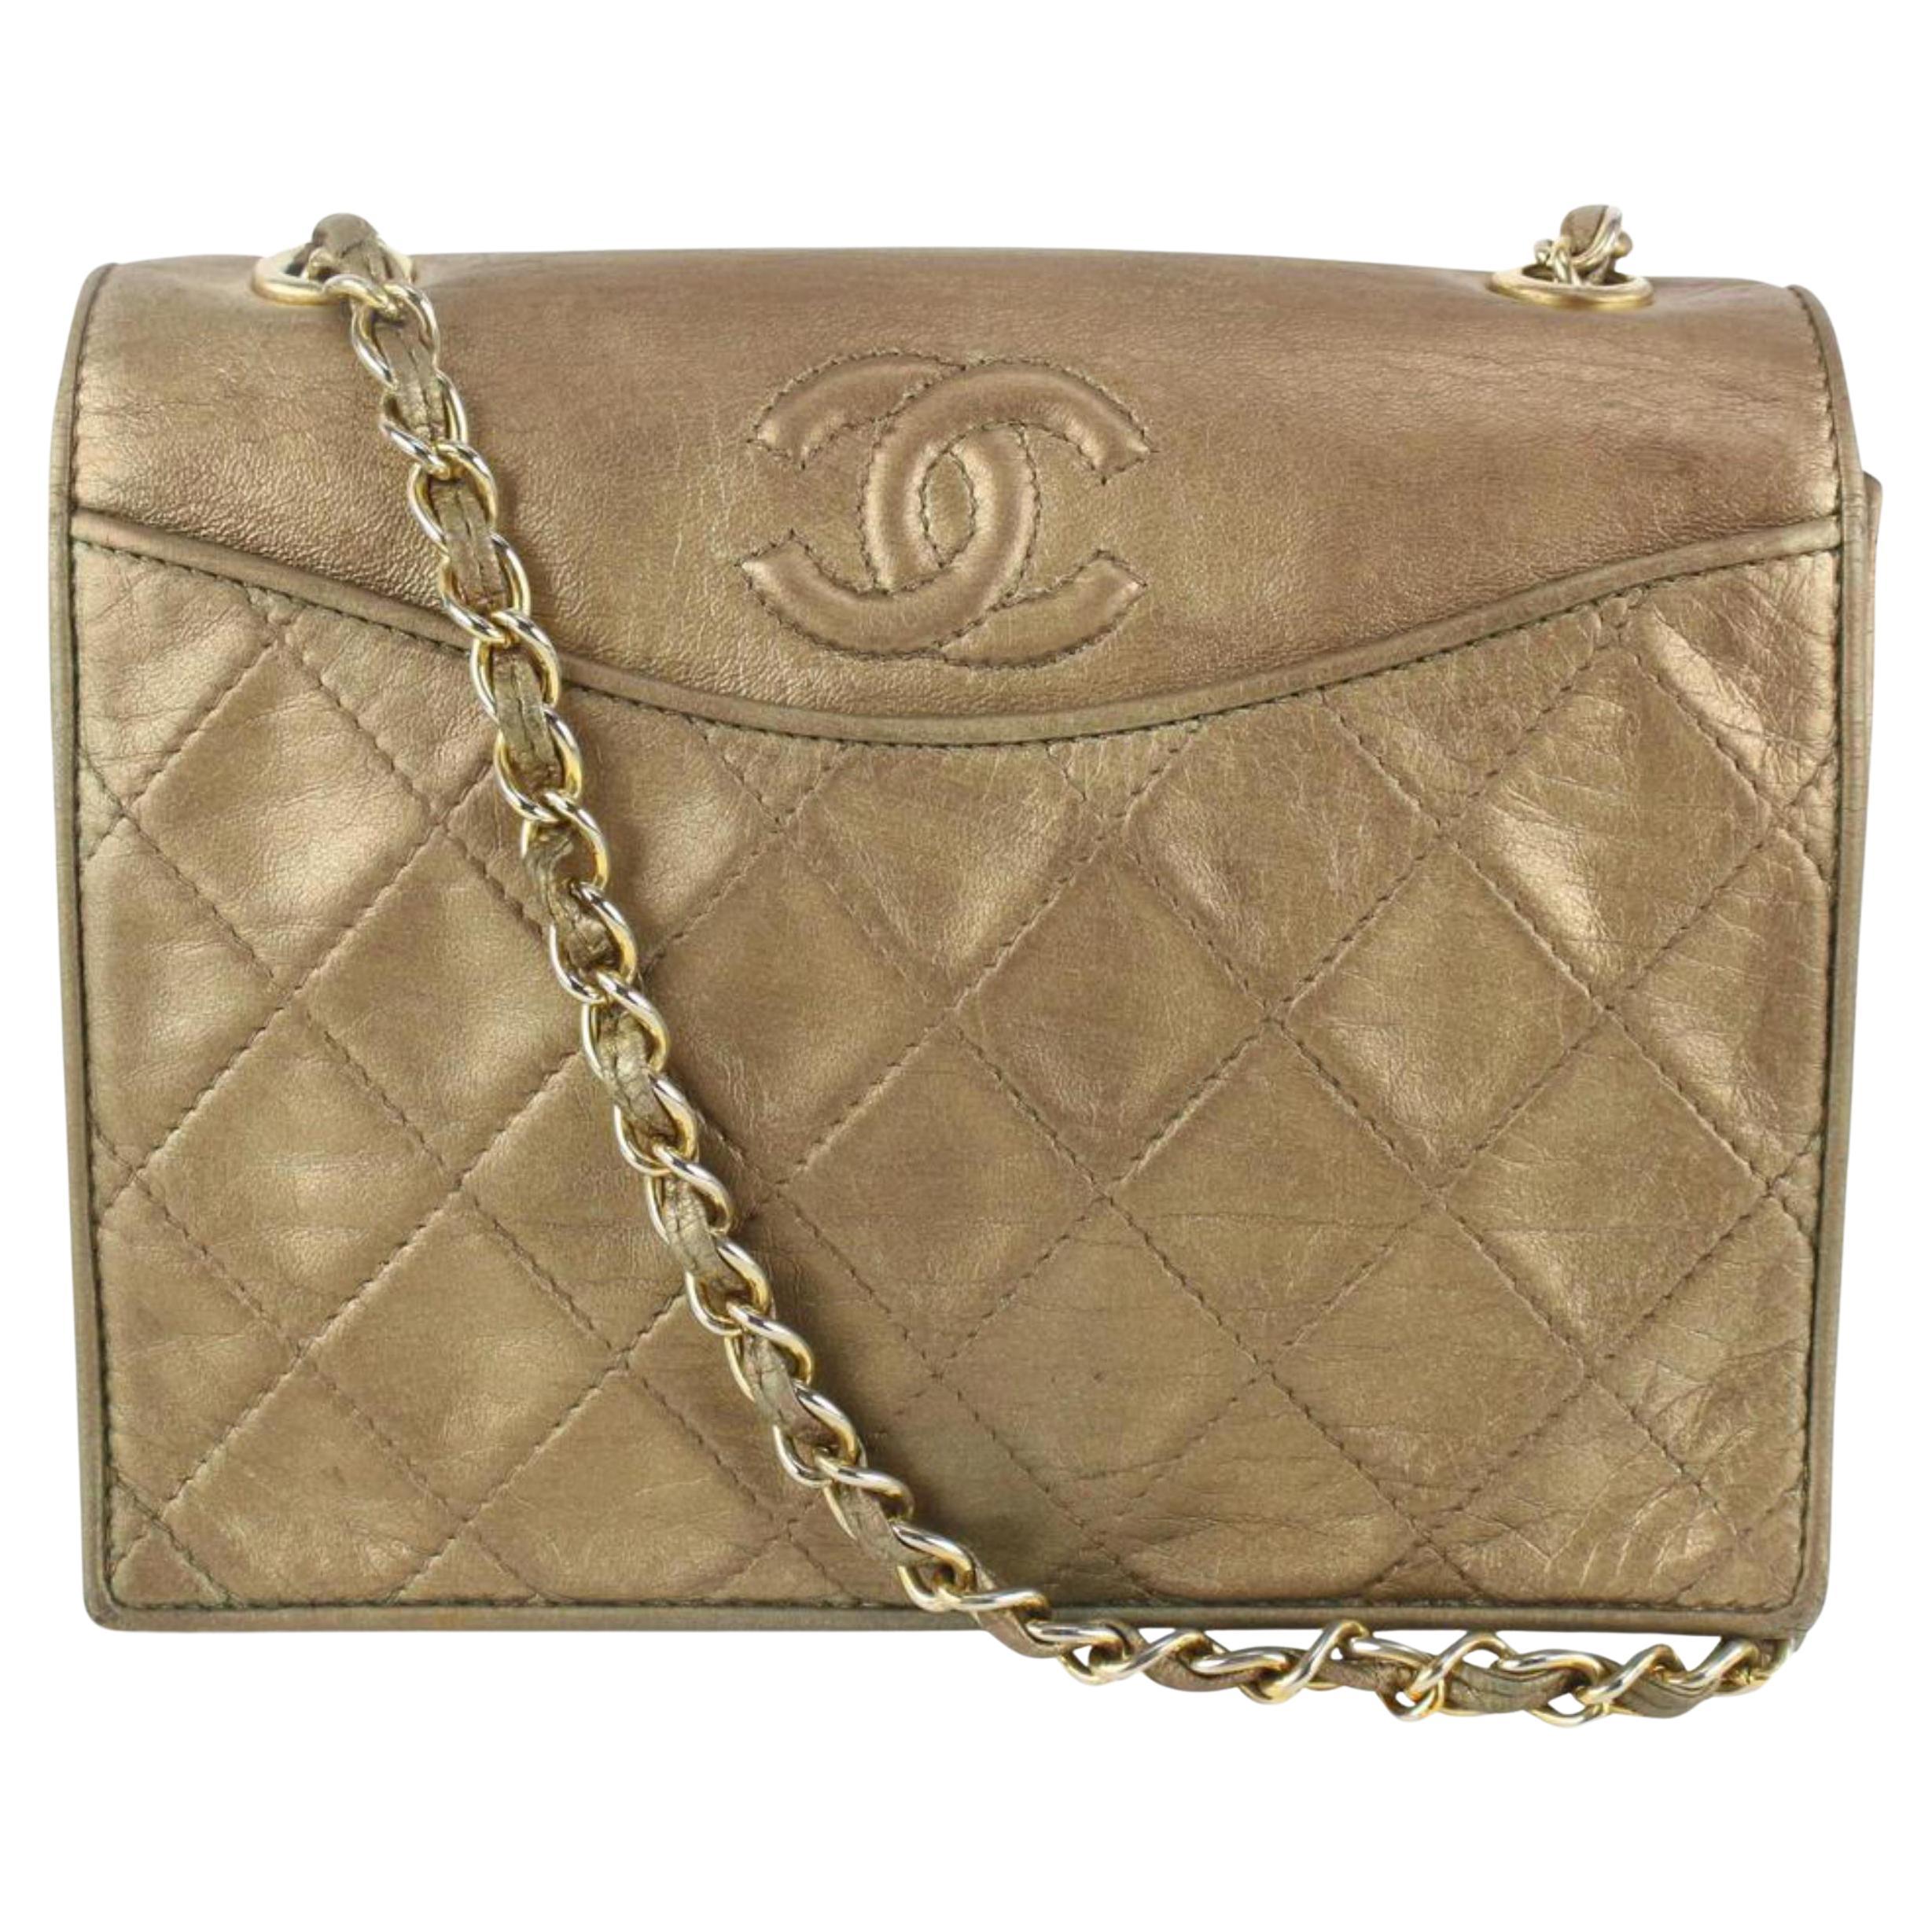 Chanel Golden Bronze Quilted Lambskin Round Flap Chain Bag 113c25 For Sale